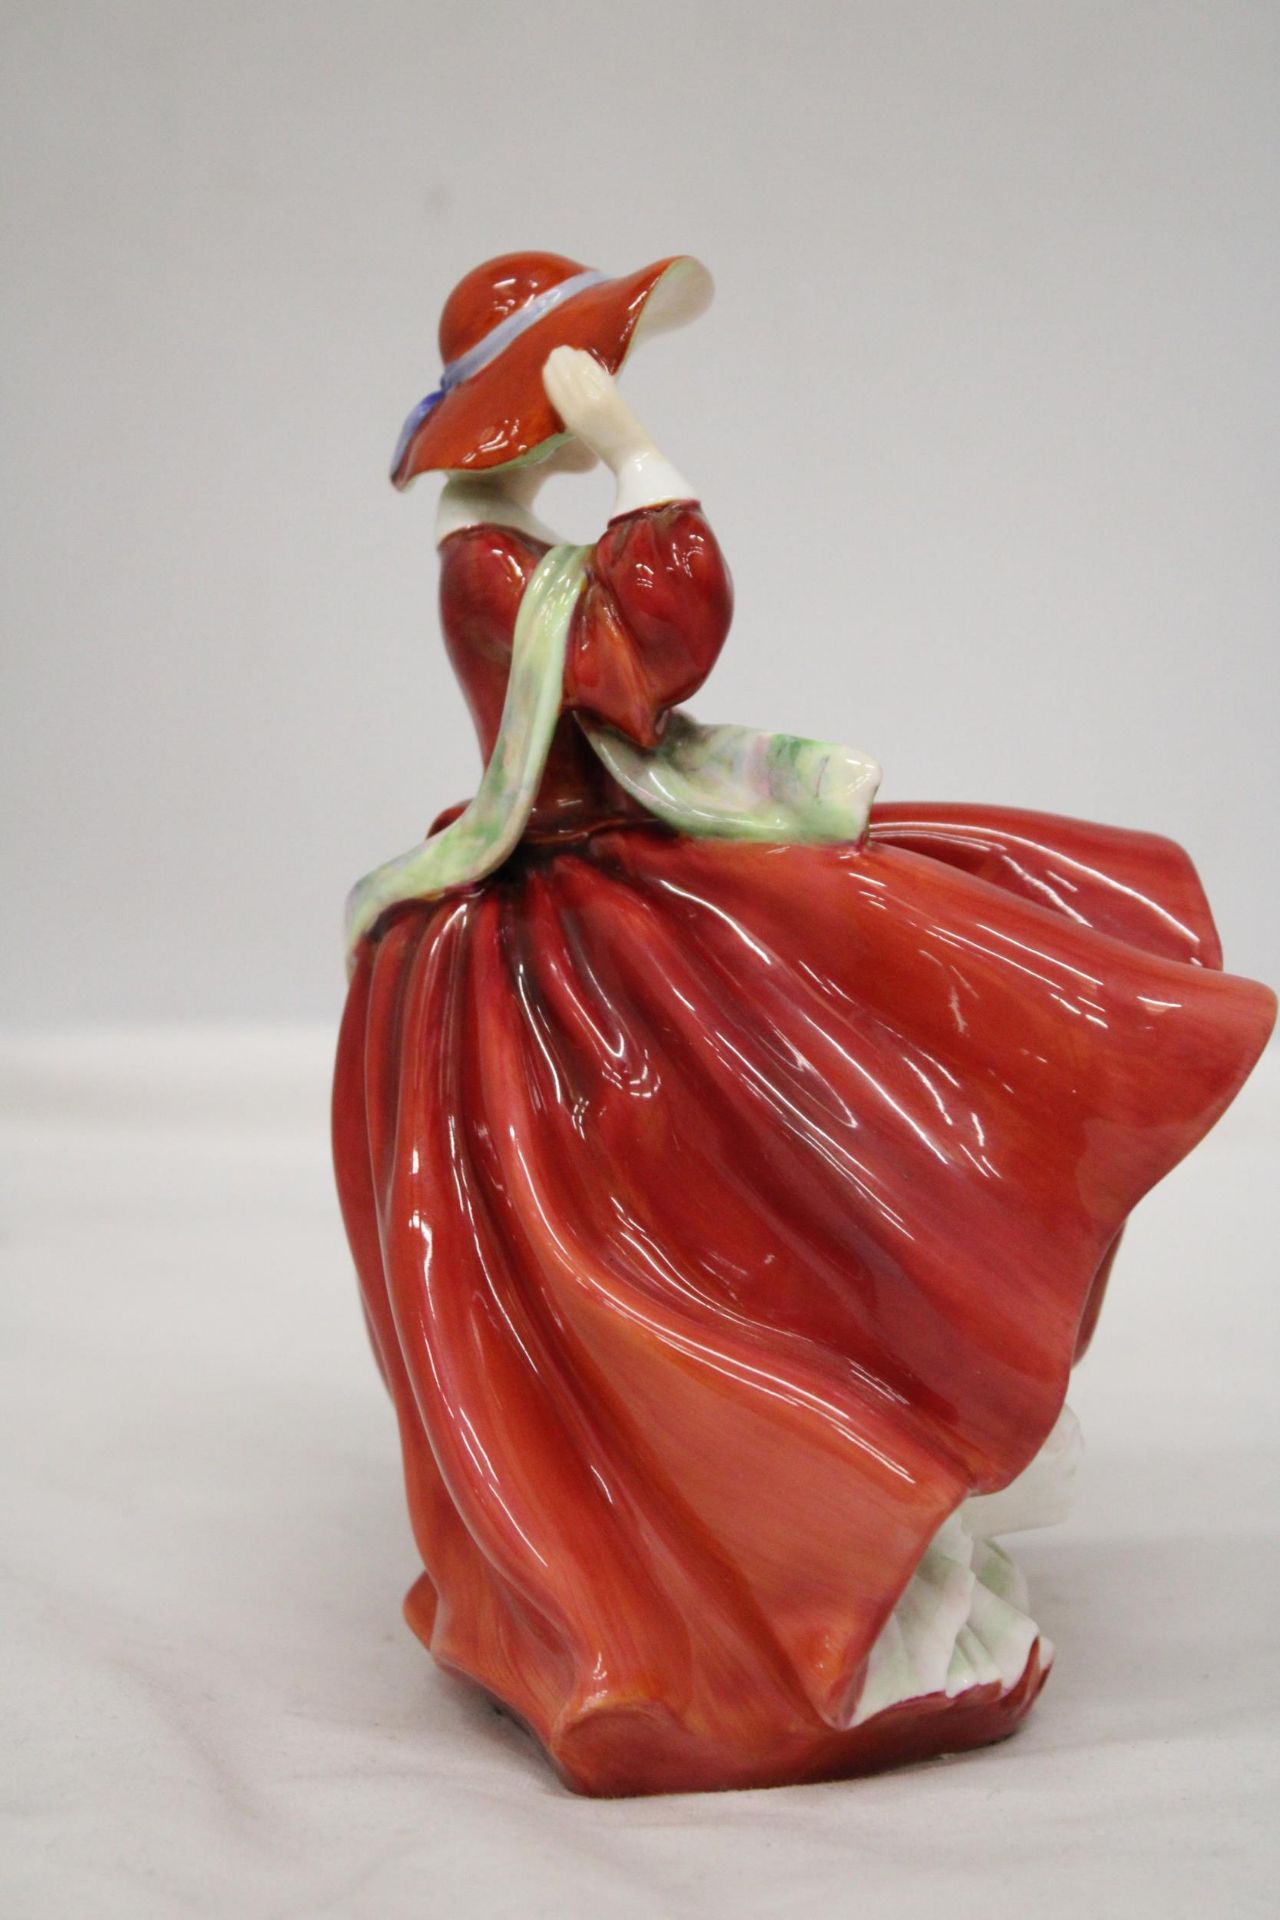 A ROYAL DOULTON FIGURE "TOP OF THE HILL" HN 1834 - Image 4 of 6